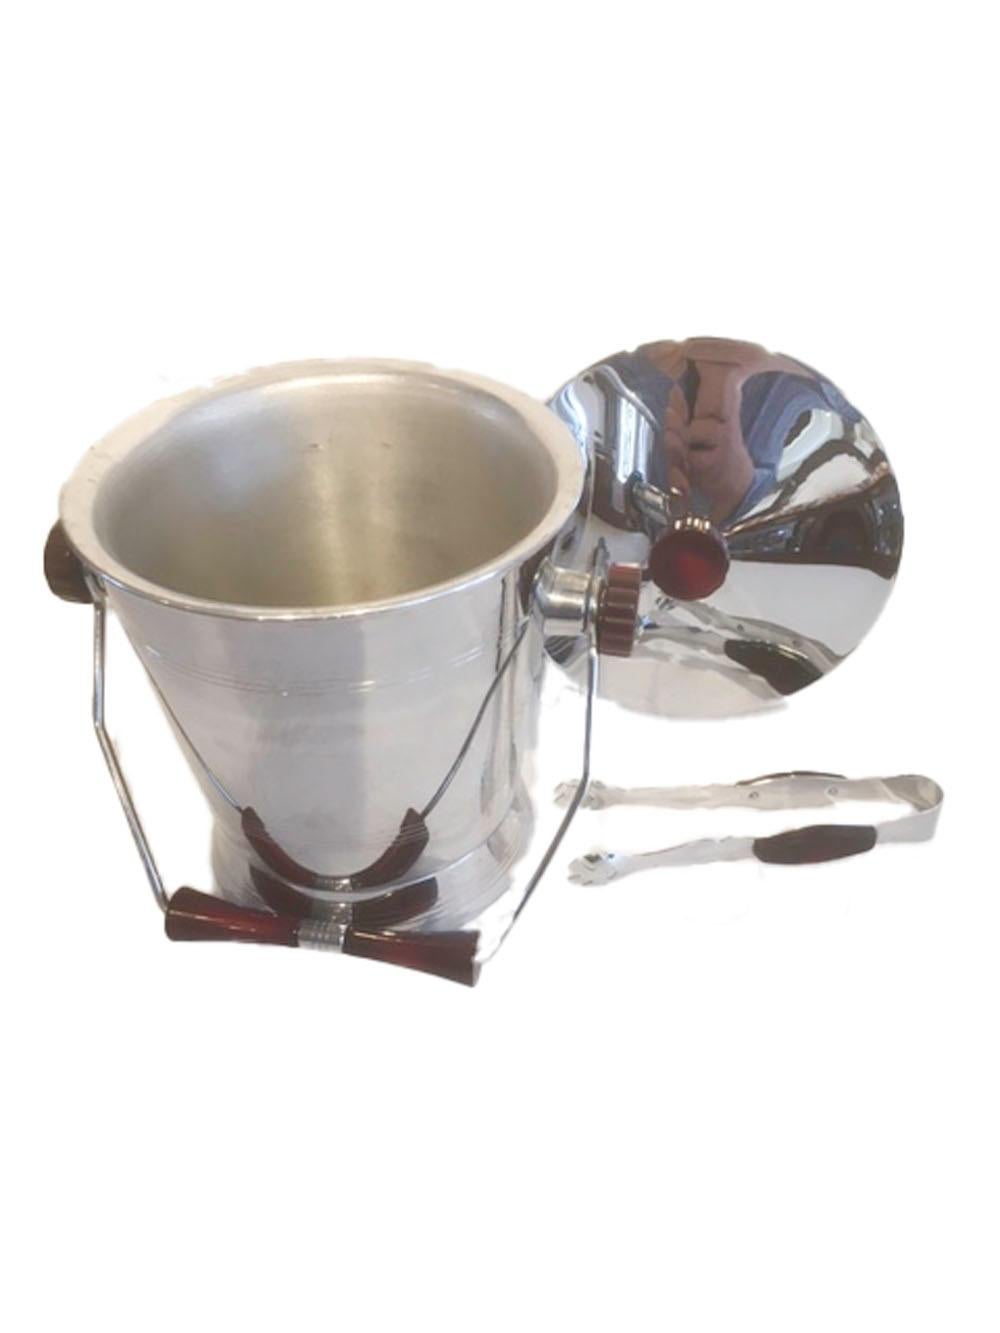 Art Deco Vintage Chrome with Red Bakelite Ice Bucket and Tongs, Barmates by Glo-Hill